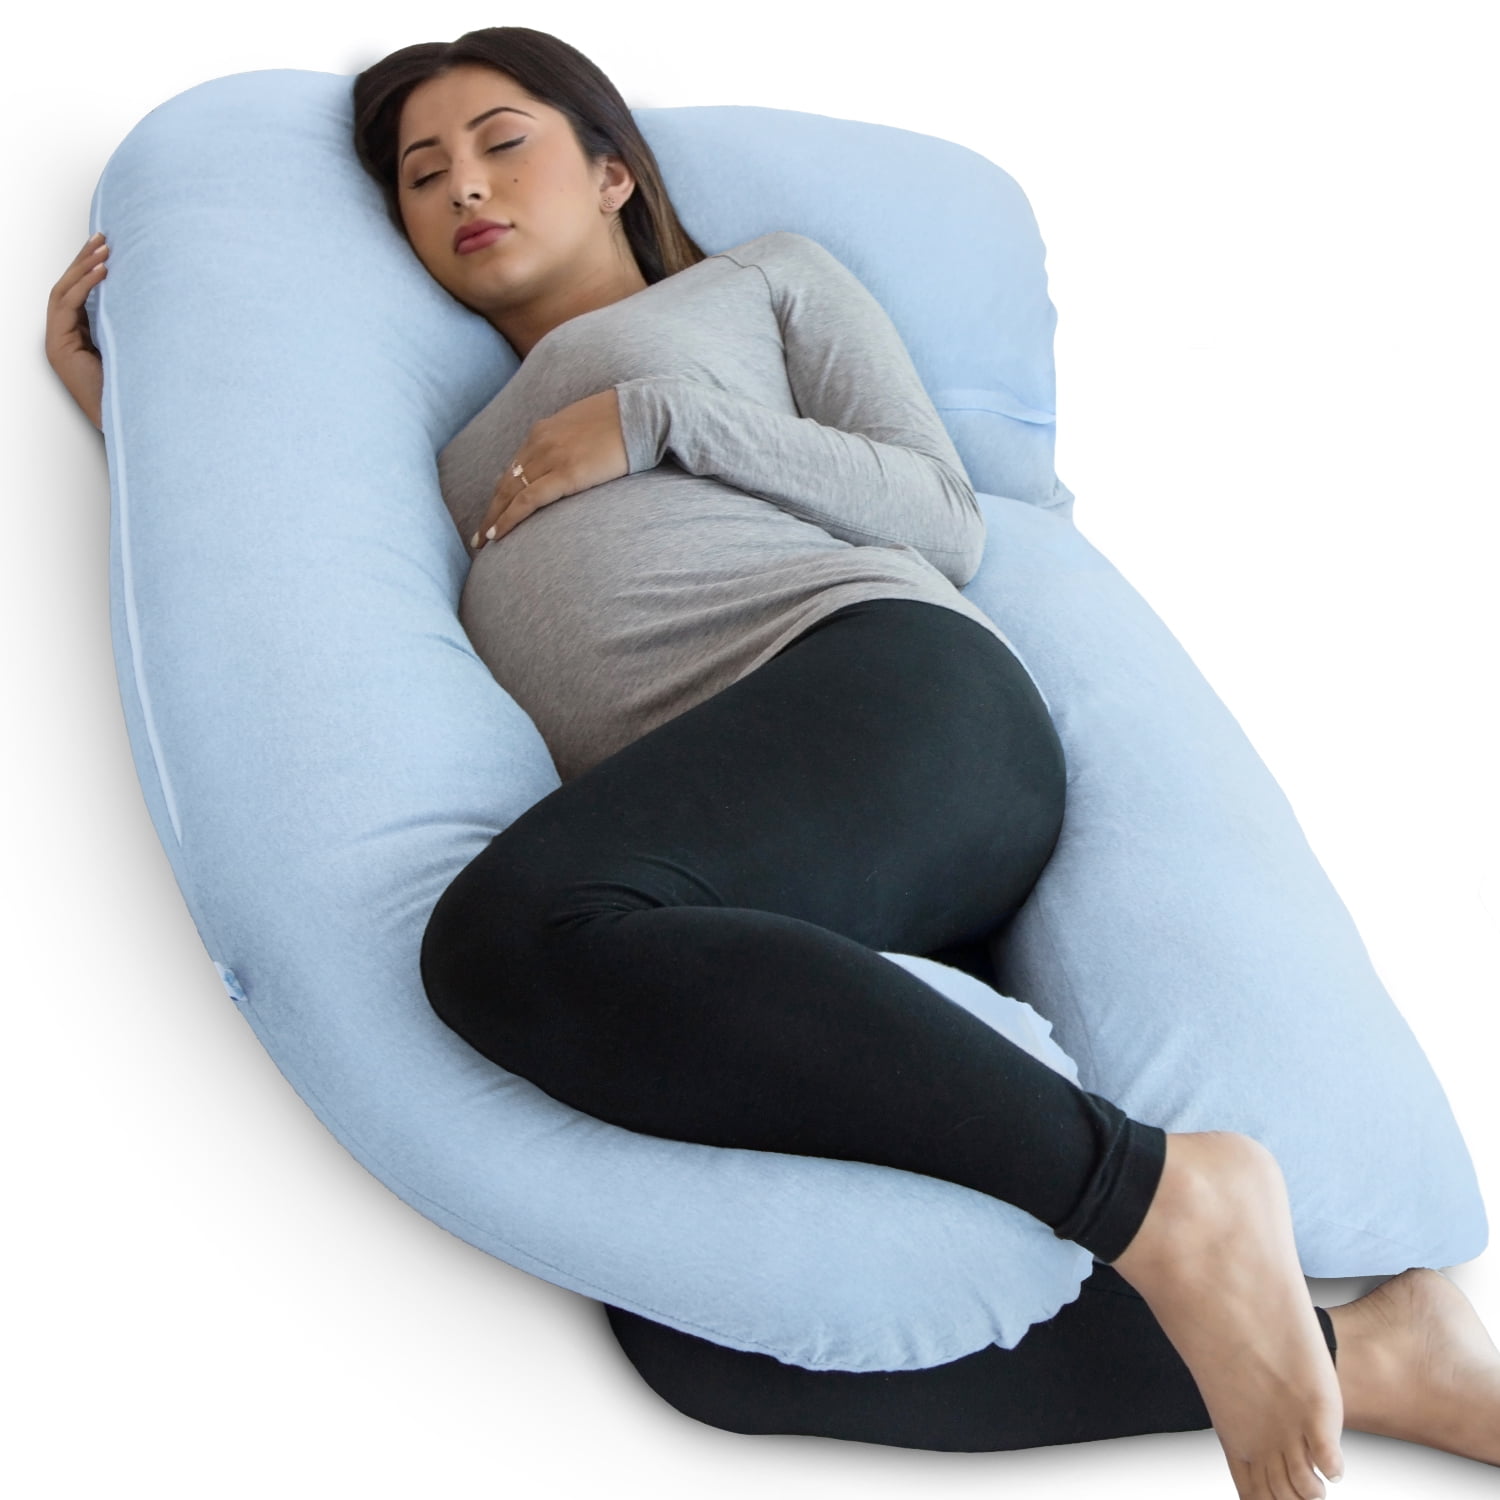 Belly for Pregnant Women Knit-Blue Hips BATTOP Pregnancy Pillows Full Body Maternity Pillow for Sleeping with Removable Washable Cover,Support for Back Legs 